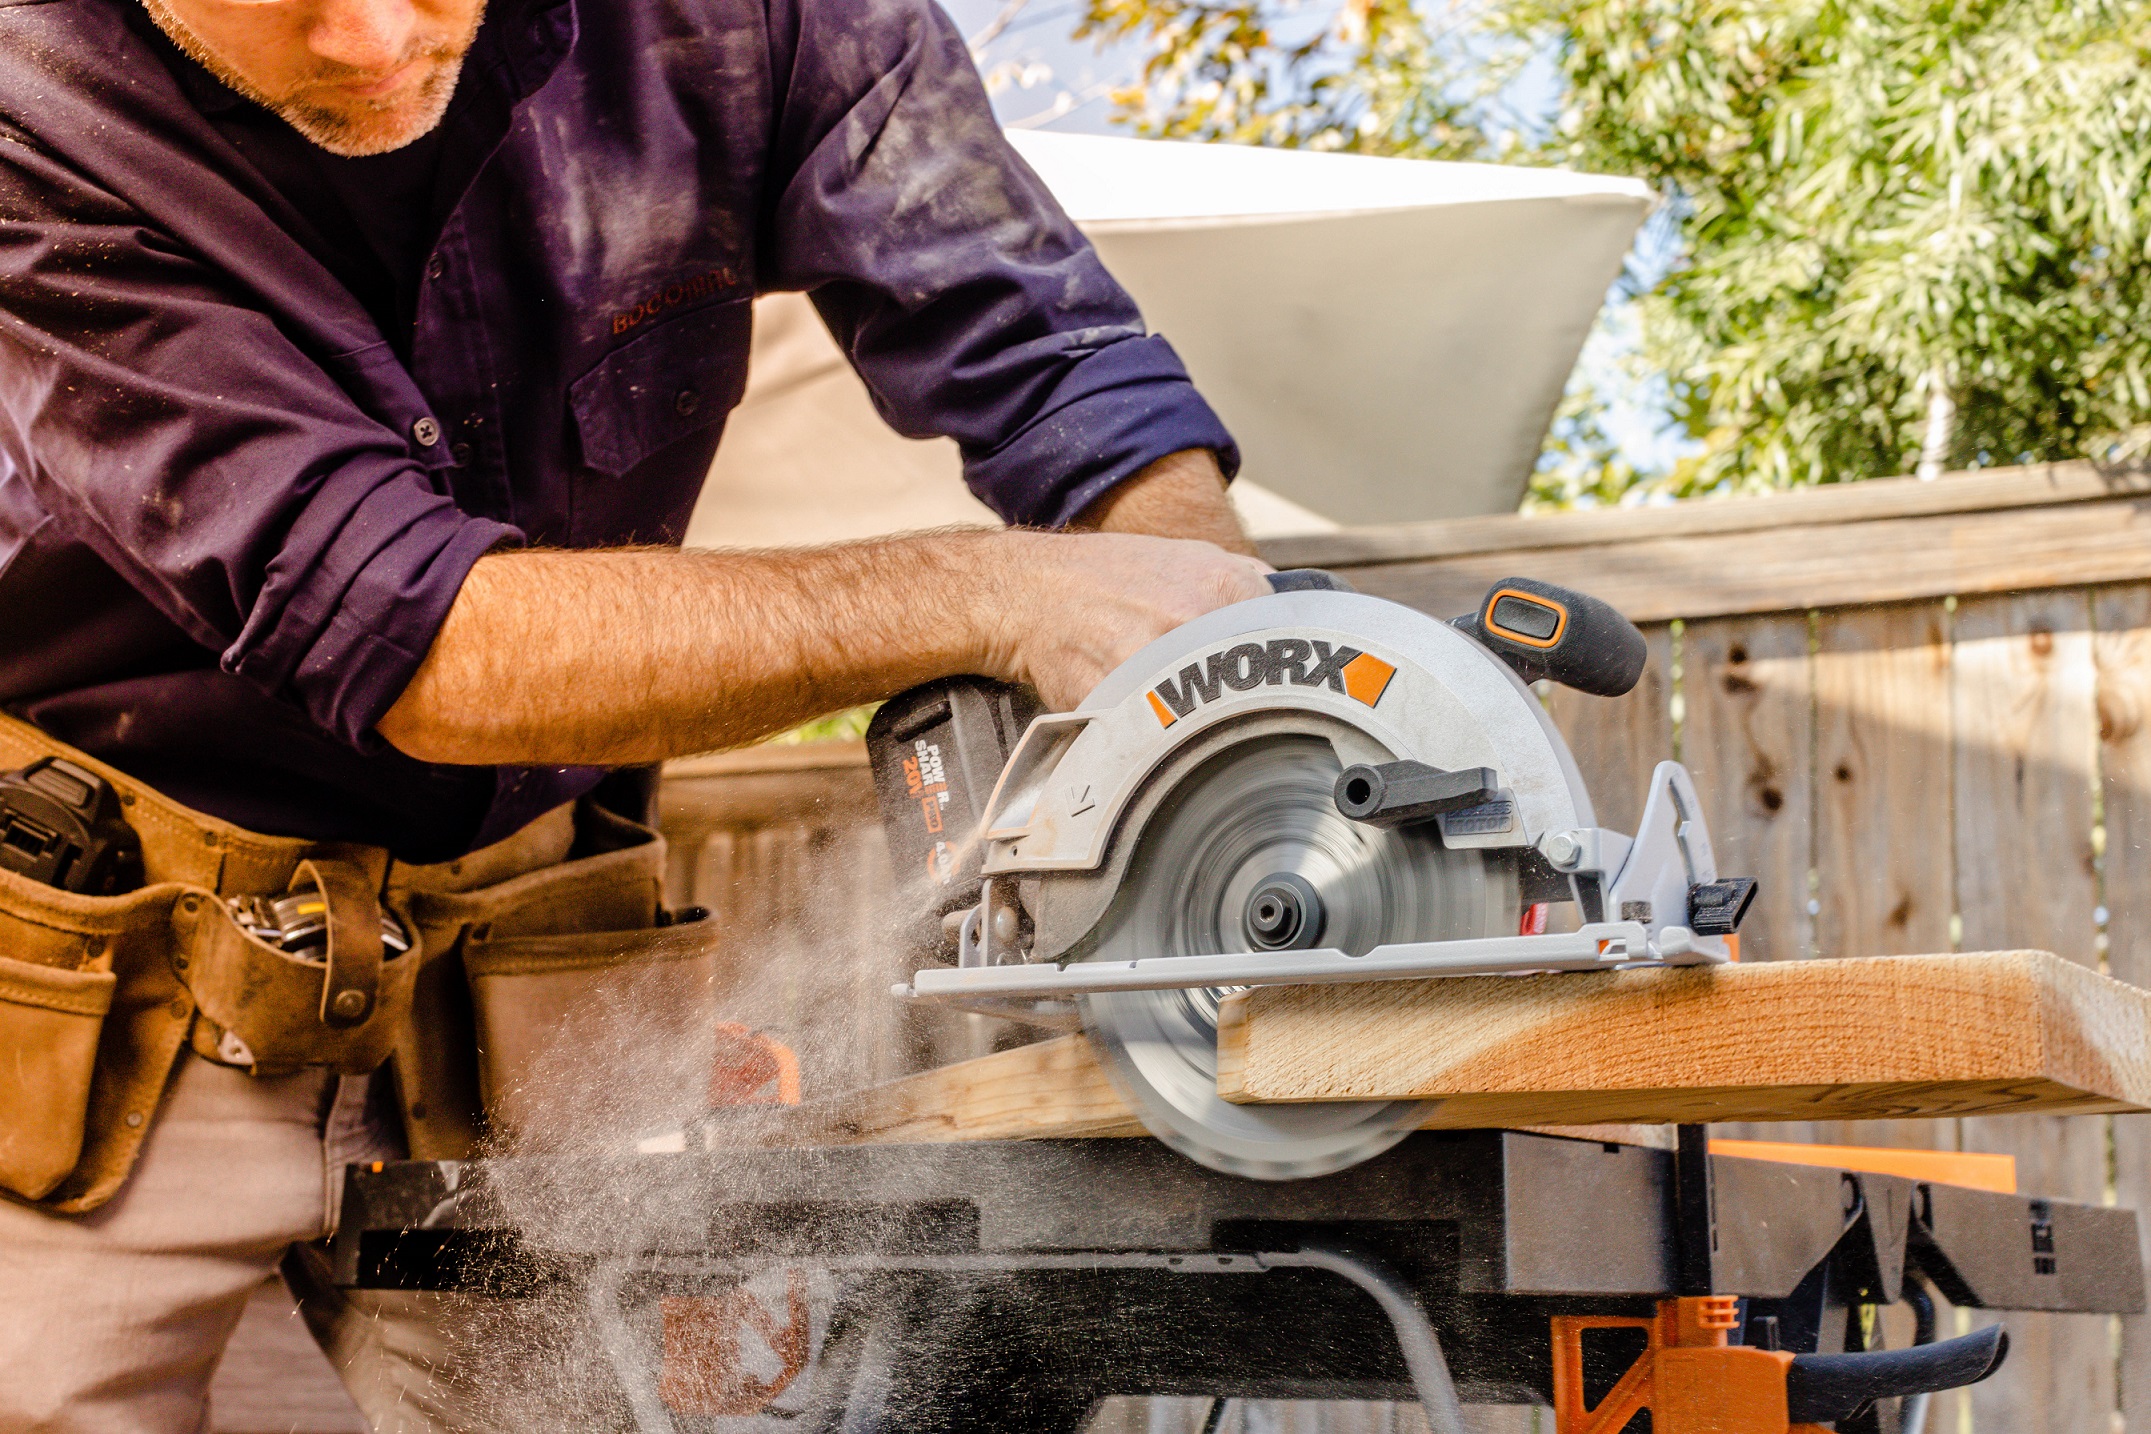 WORX Nitro 20V circular saw is ideal for ripping and cross-cutting dimensional lumber.